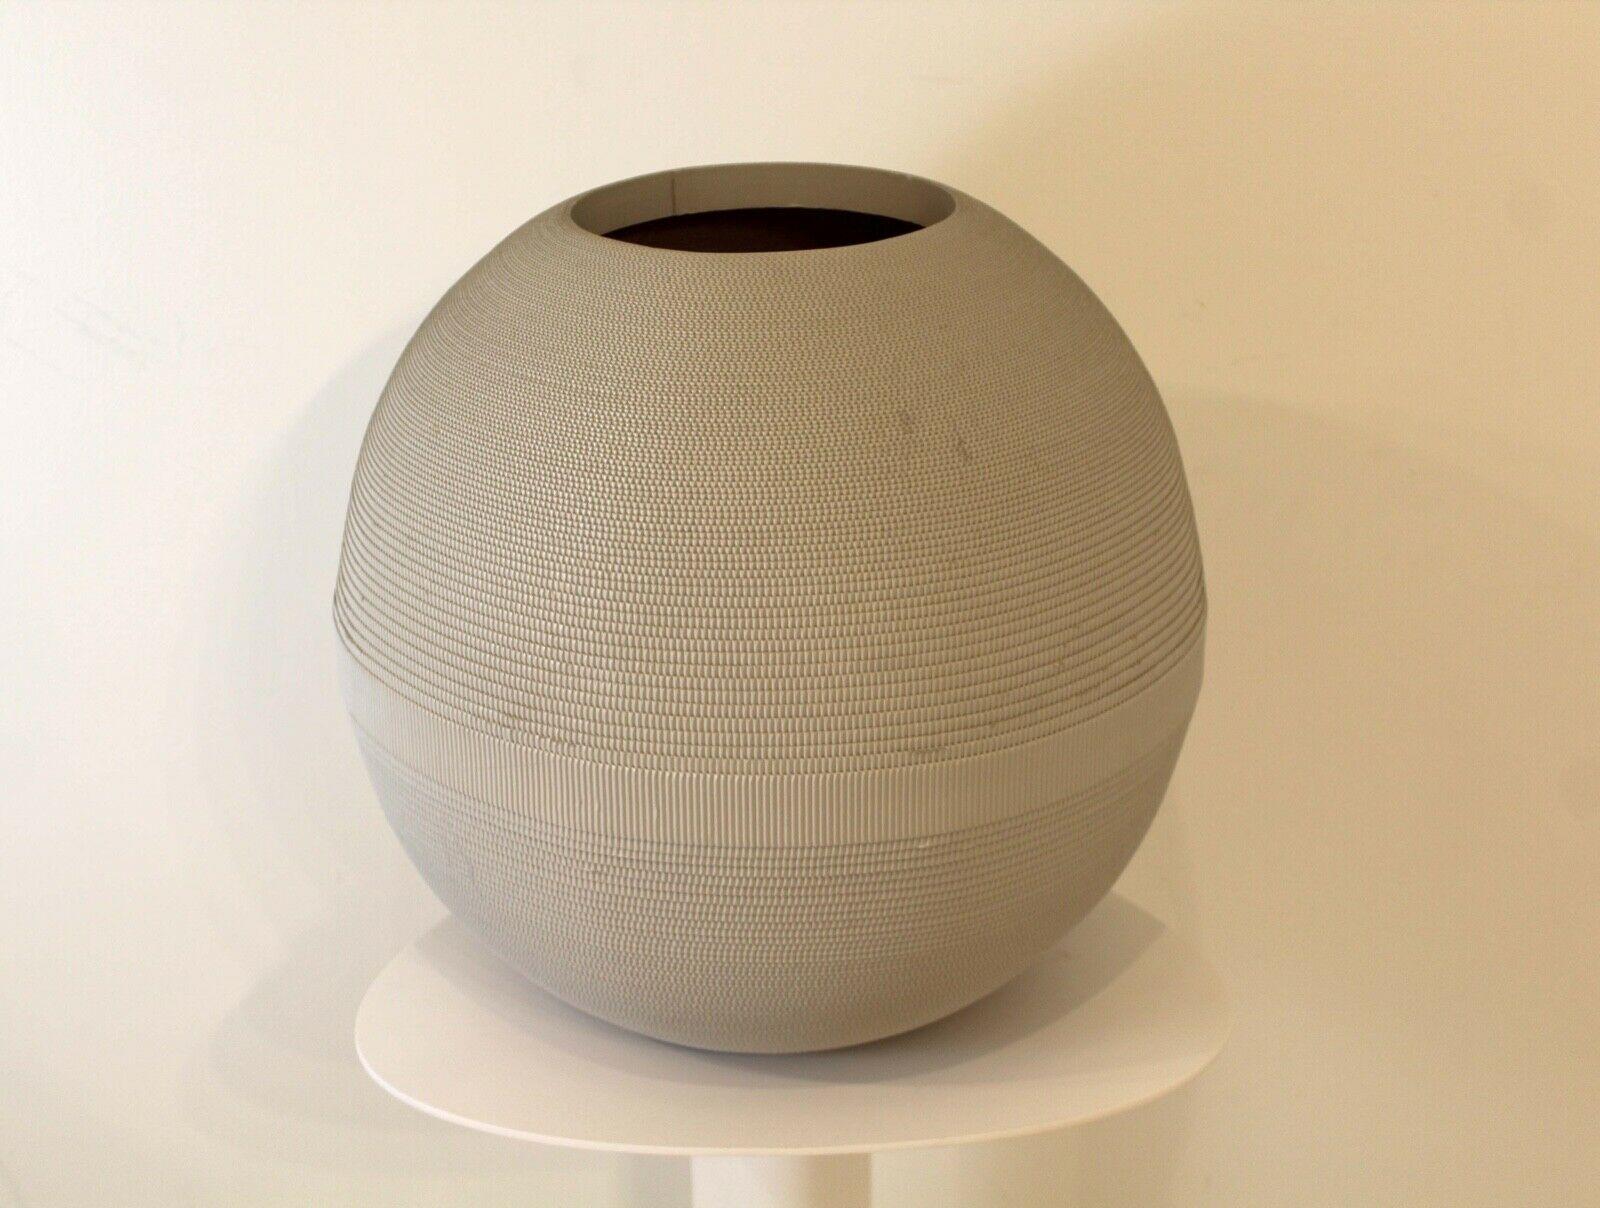 From Le Shoppe Too in Michigan, this large corrugated cardboard vase rendered in matte gray by Flute, Chicago circa 1980s and moving in concentric circles creating the round shape. In very good condition with little or no